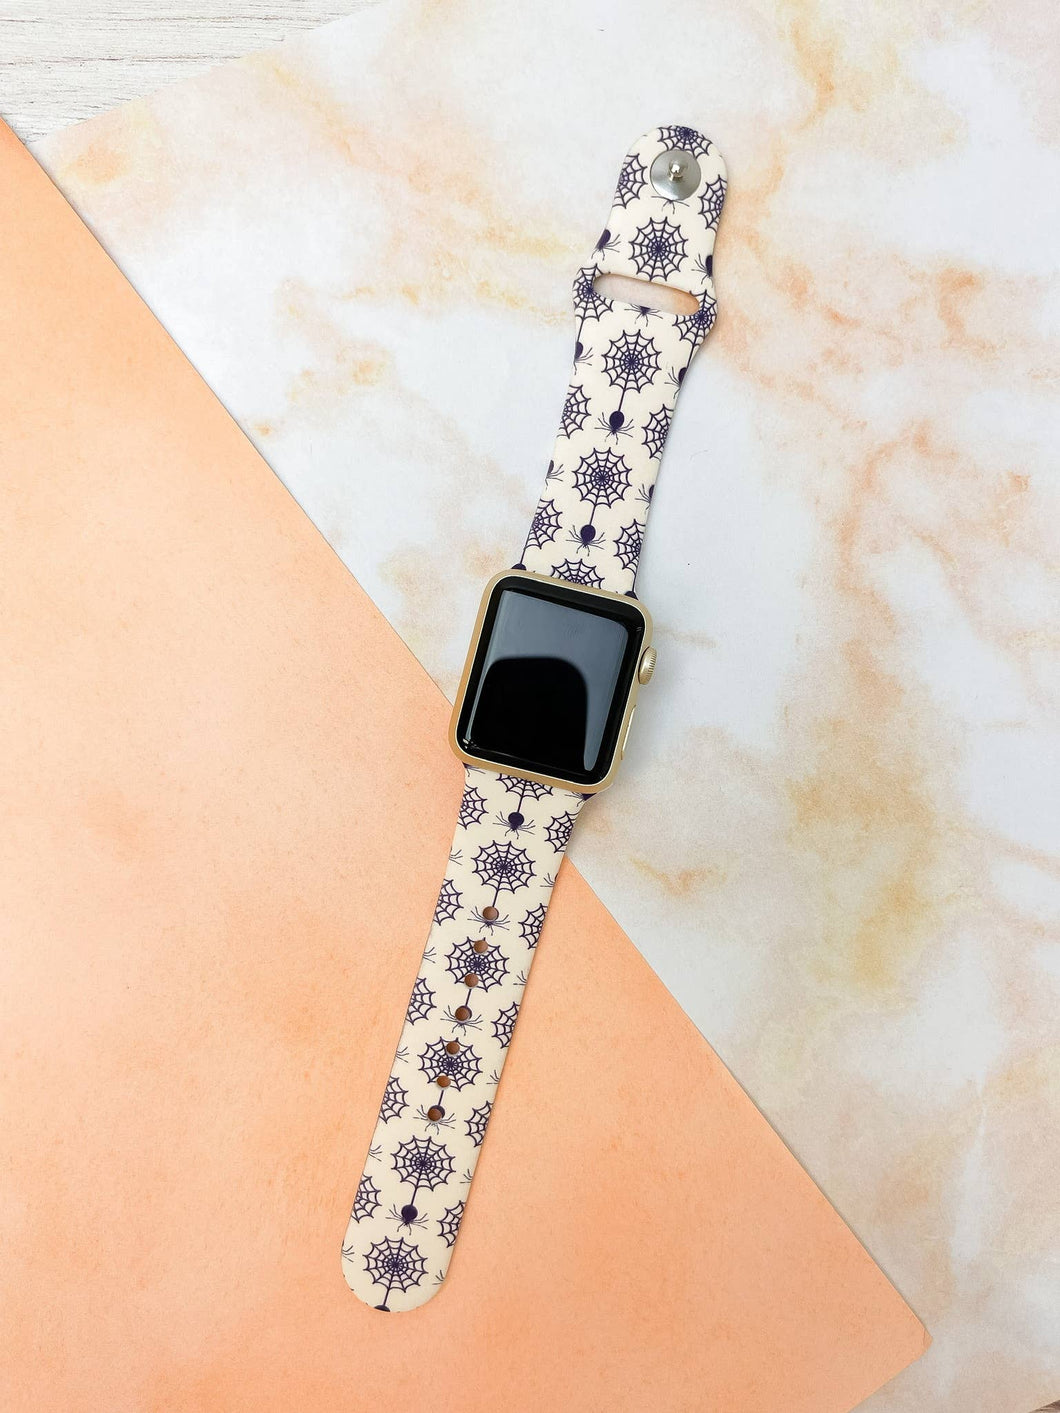 Spider Web Printed Silicone Smart Watch Band